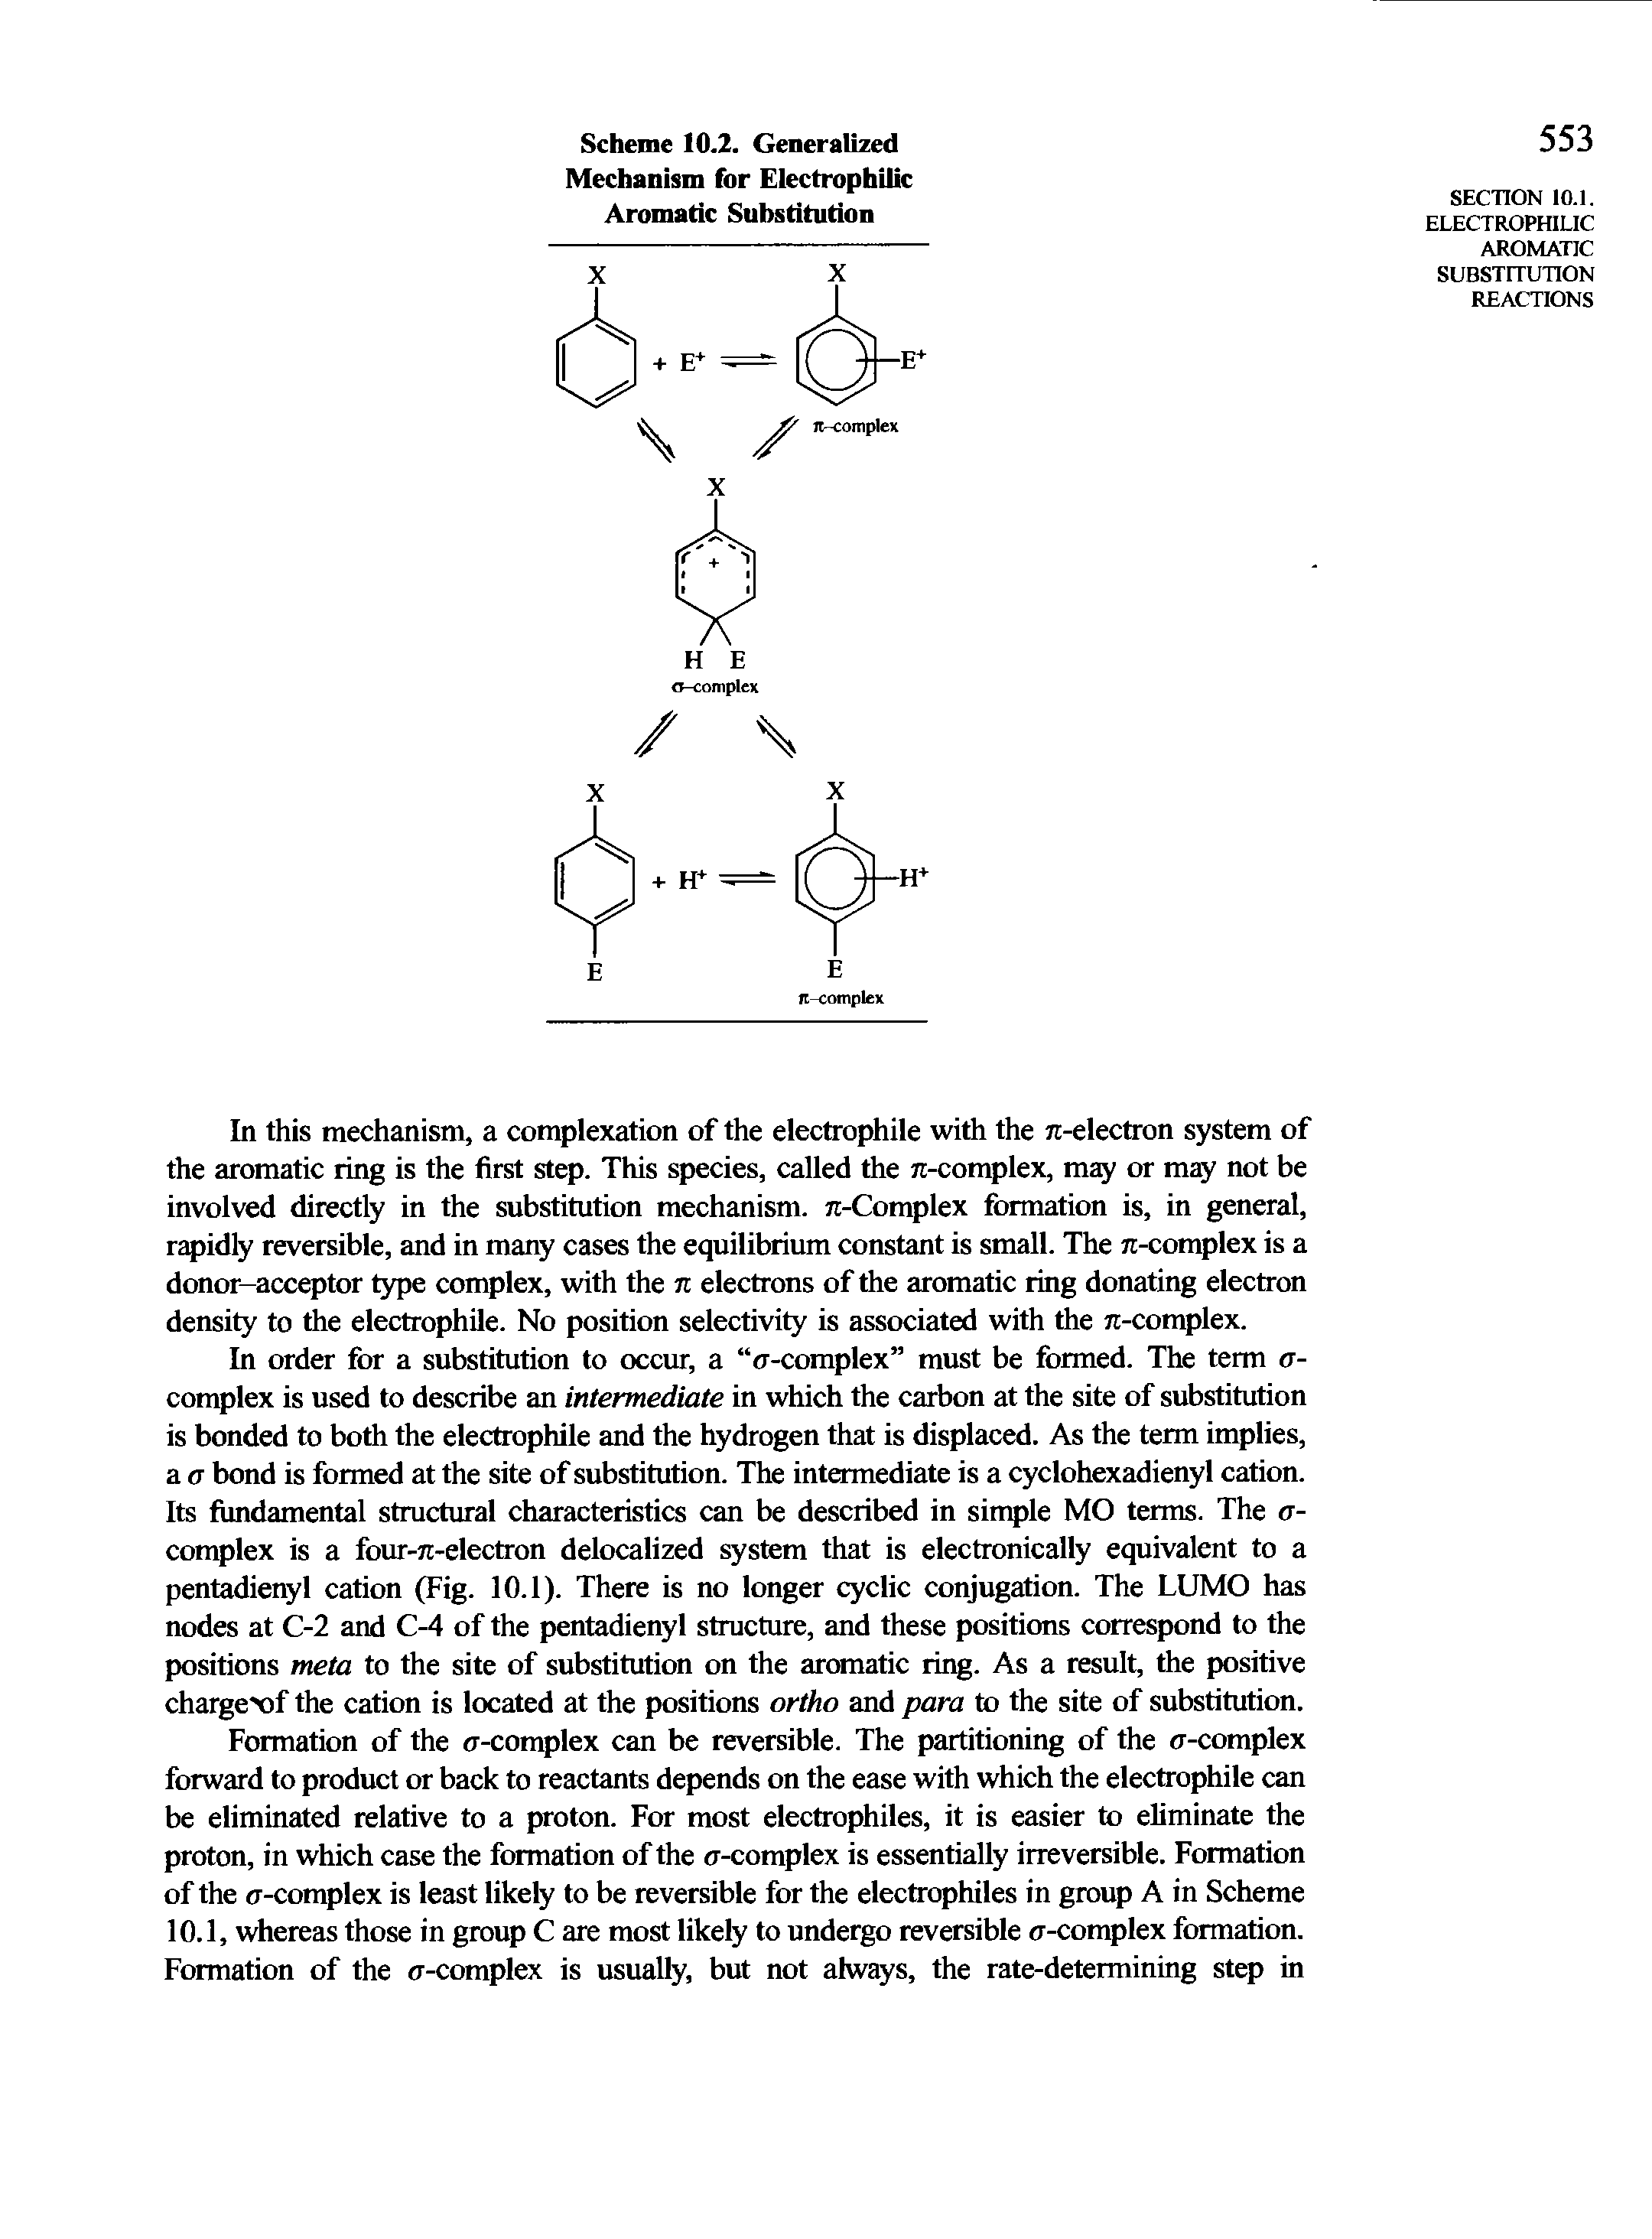 Scheme 10.2. Generalized Mechanism for Electrophilic Aromatic Substitution...